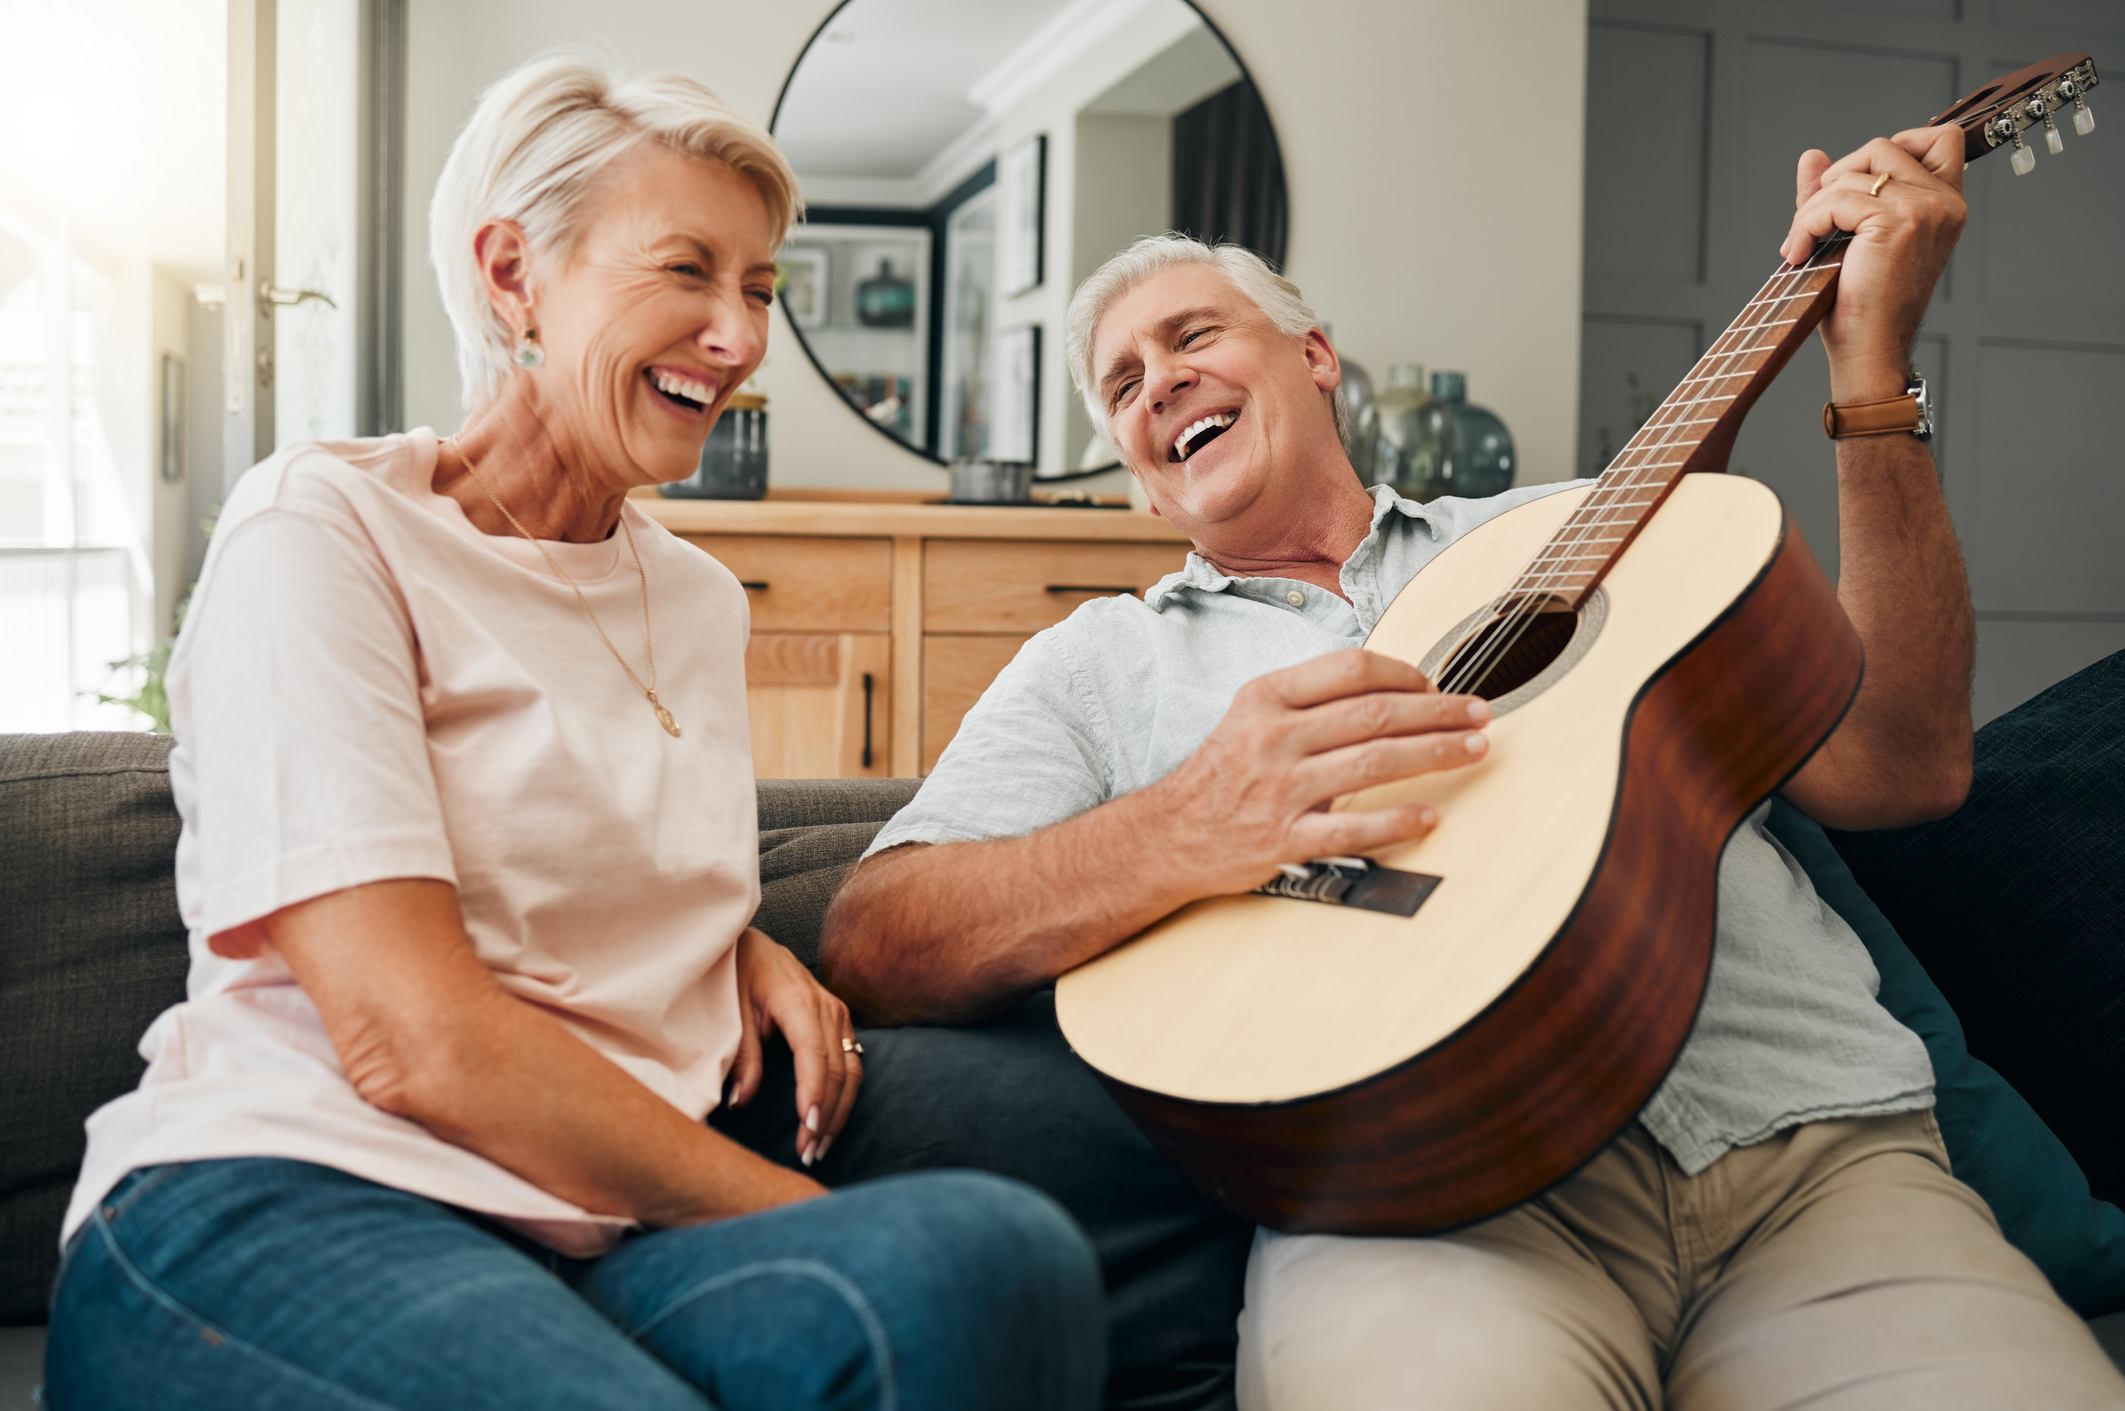 a man is playing a guitar for his wife who is laughing